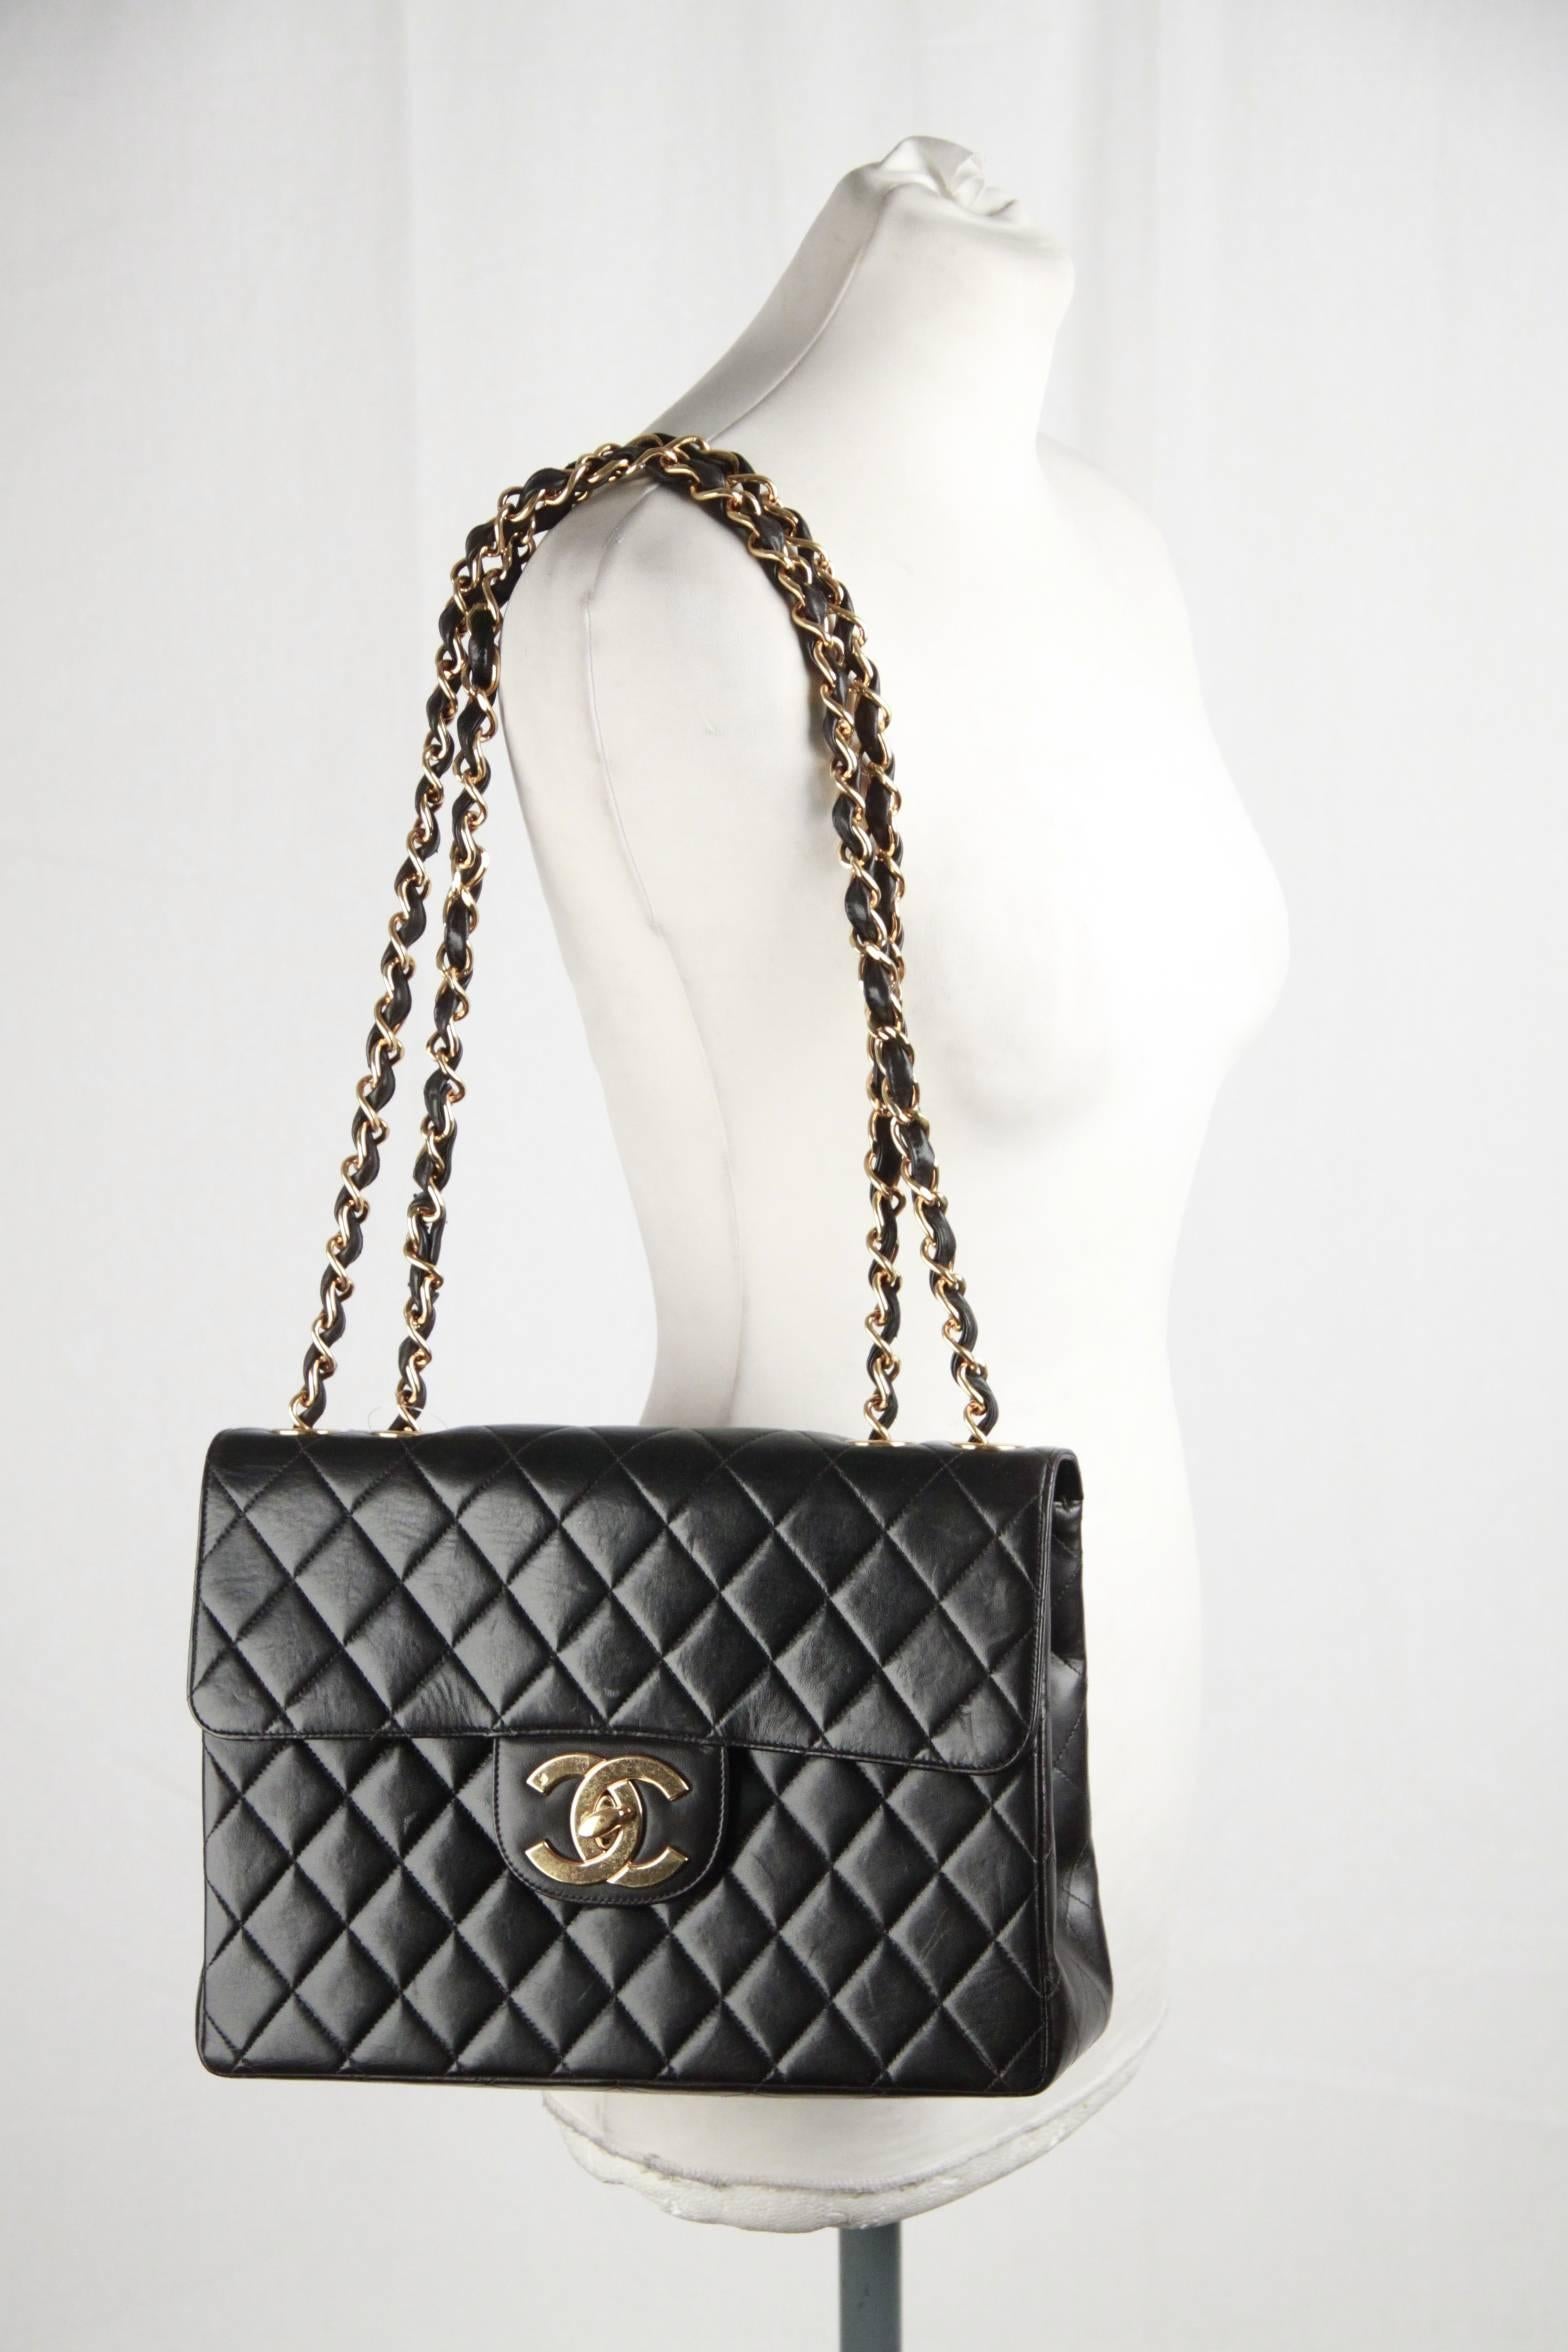 - Vintage Chanel JUMBO Classic Flap Shoulder Bag
- Period/Era: 1996/1997
- Timeless black quilted lambskin leather 
- Signature oversized CC front clasp in 24k gold plated hardware, as with the large chunky Chanel chain
- Classic back pocket
- Lined